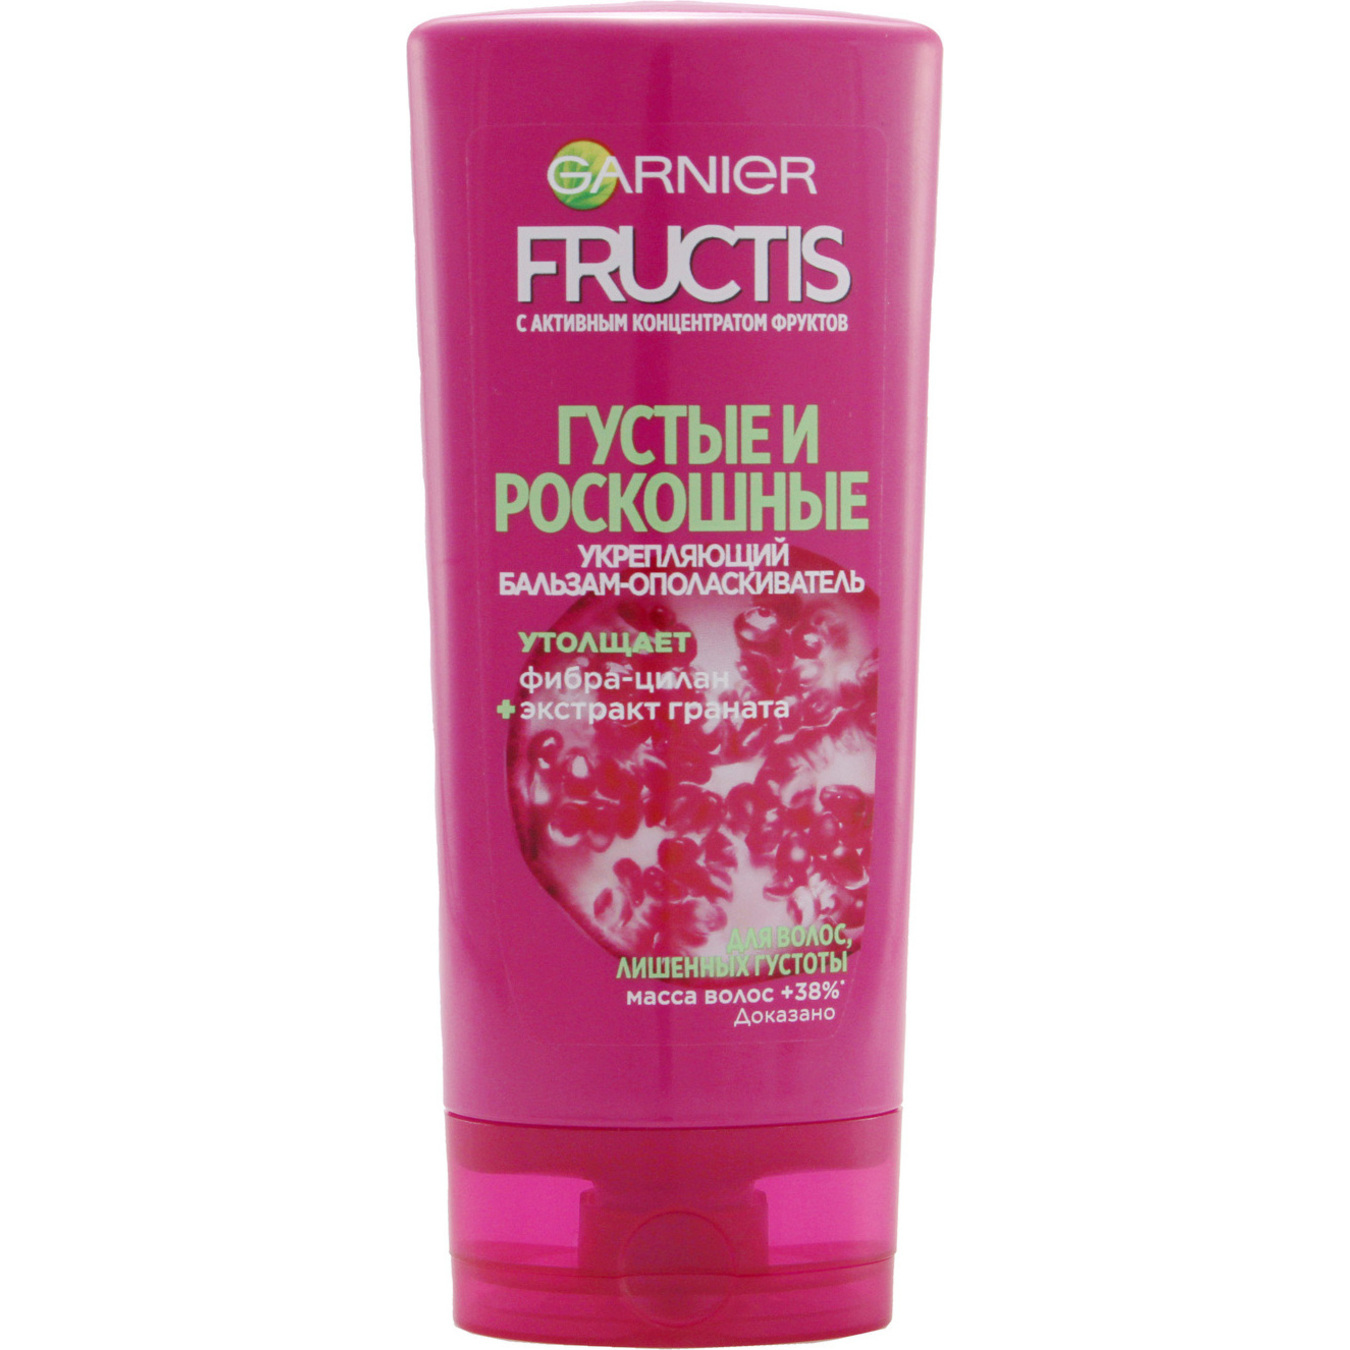 Garnier Fructis Conditioner Strengthening Thick and Luxurious Hair 200ml